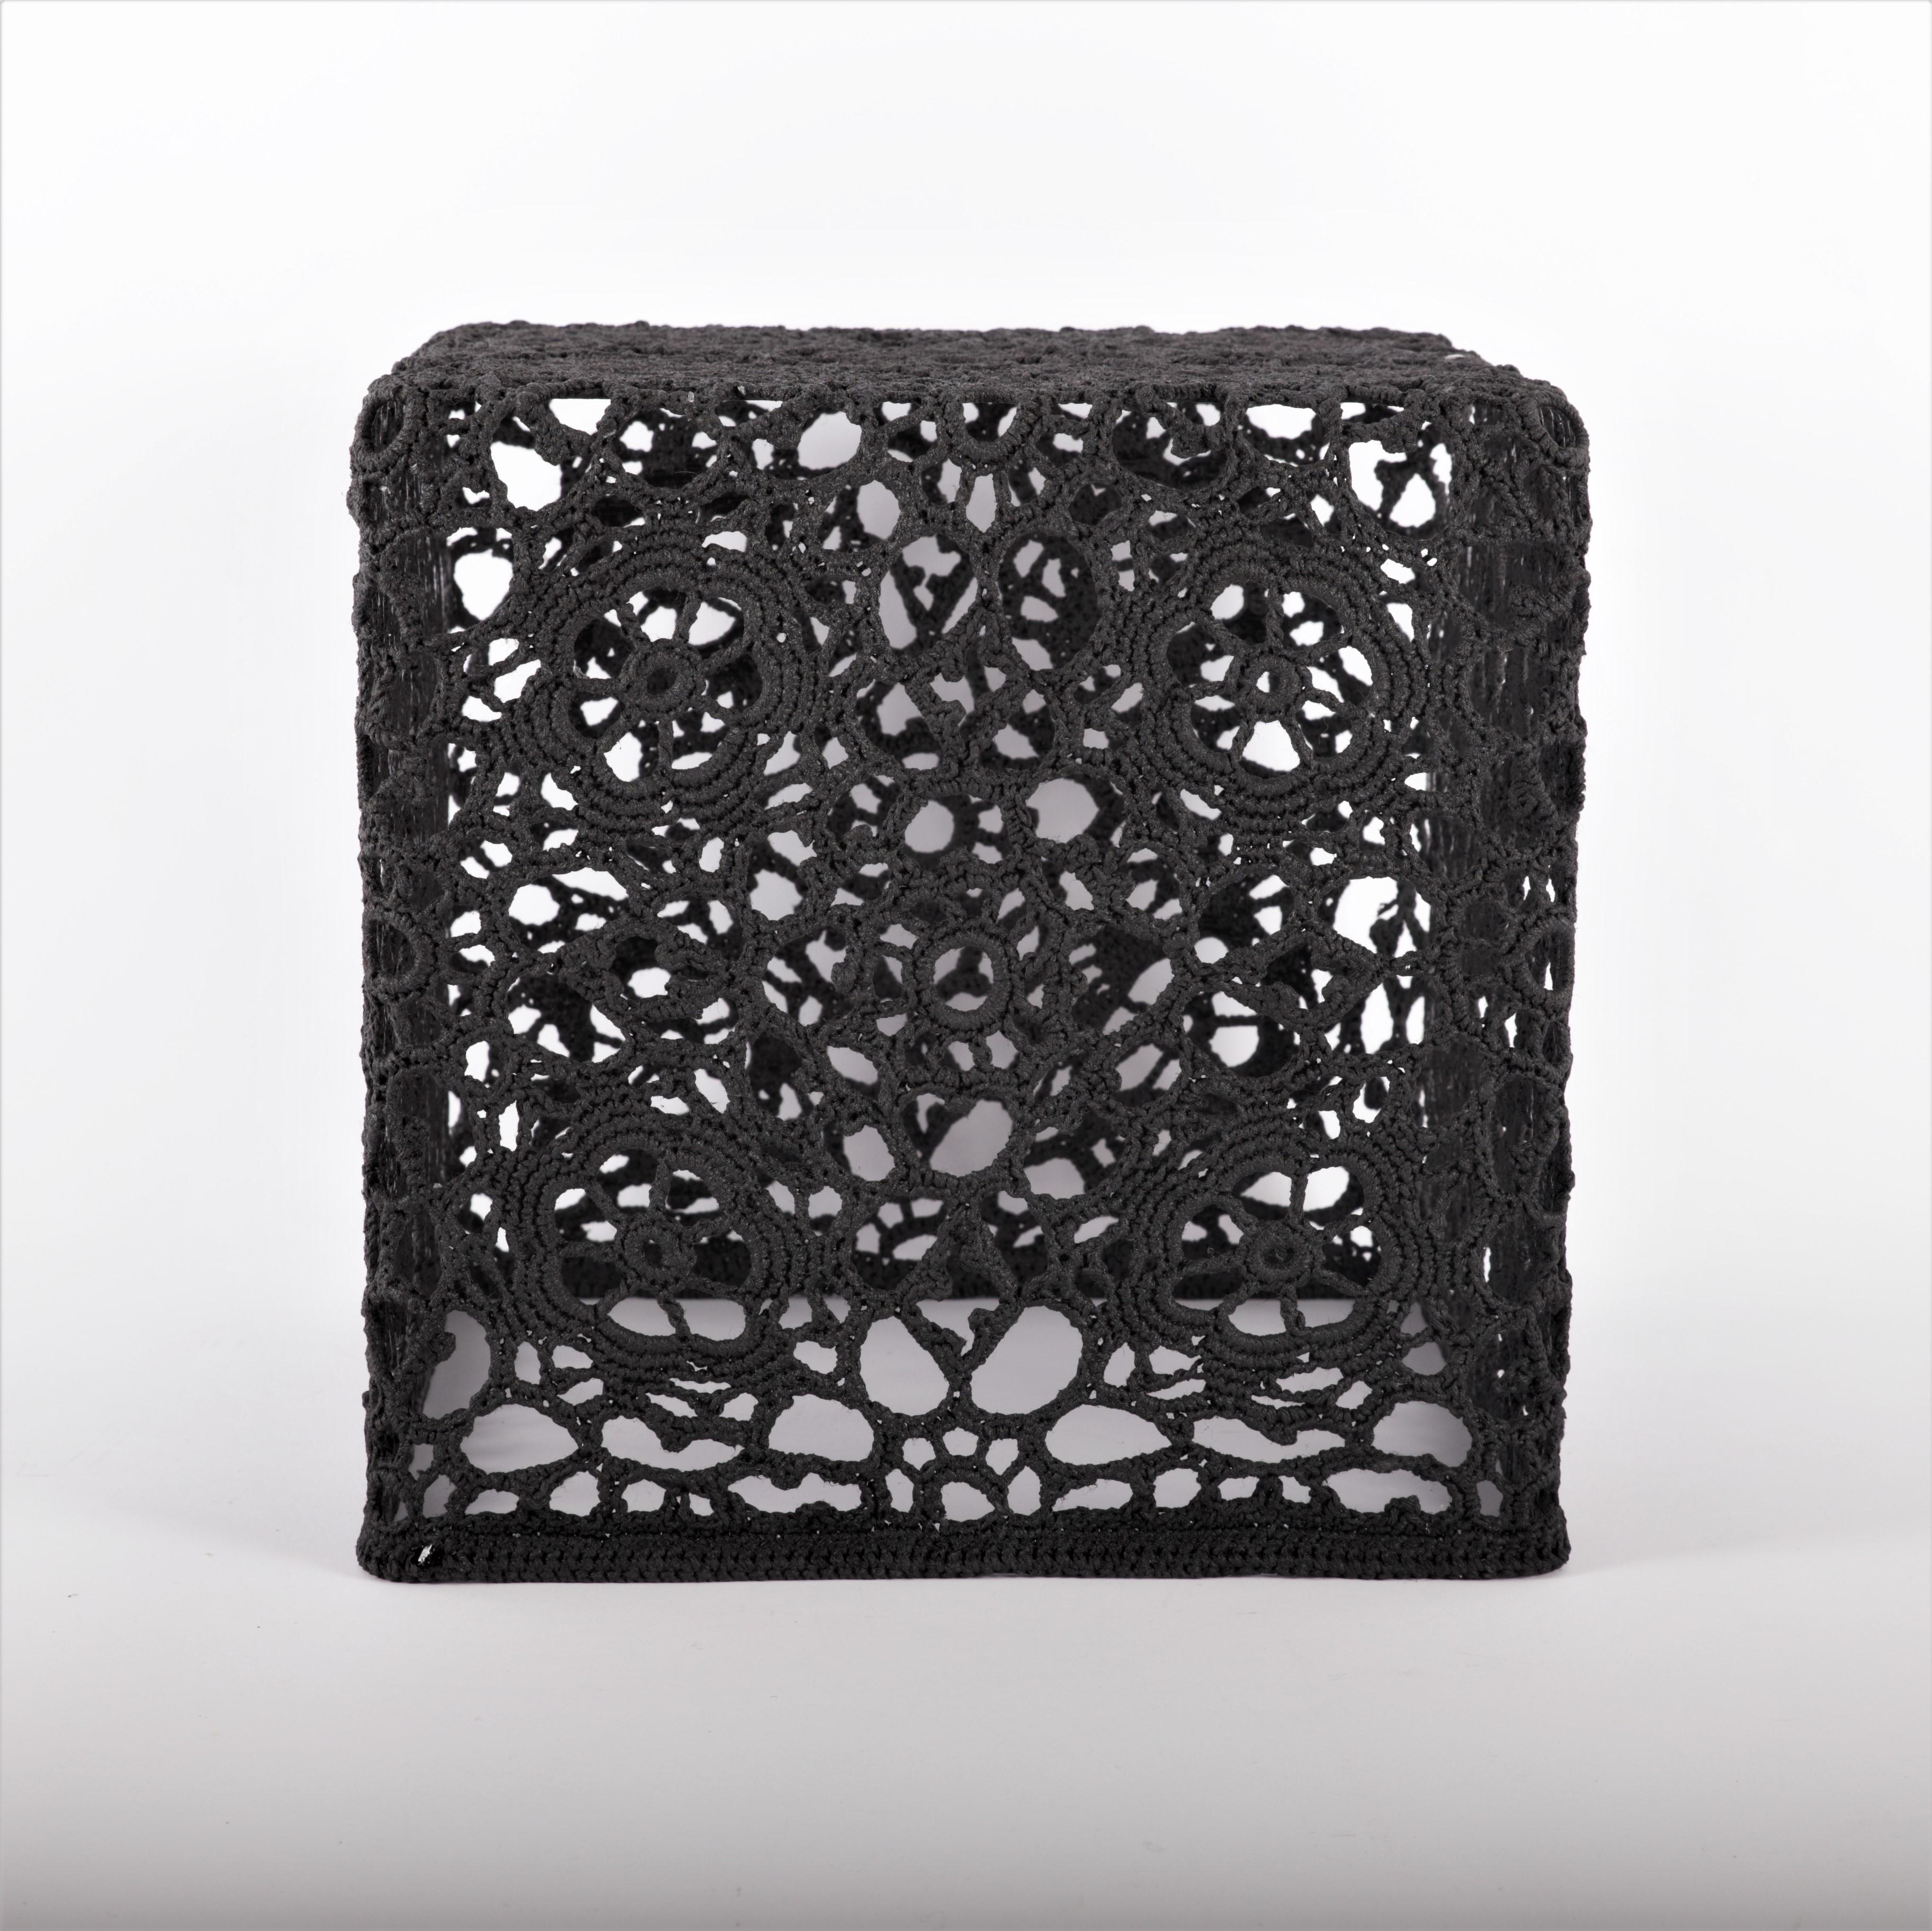 Crochet side table, special black version of 30x30x30cm, designed by Marcel Wanders, 2007, of which we have a few pieces available. 

Inspired by the earlier Lace Table (1997), the Crochet Table (2001) uses crochet material to create a more robust